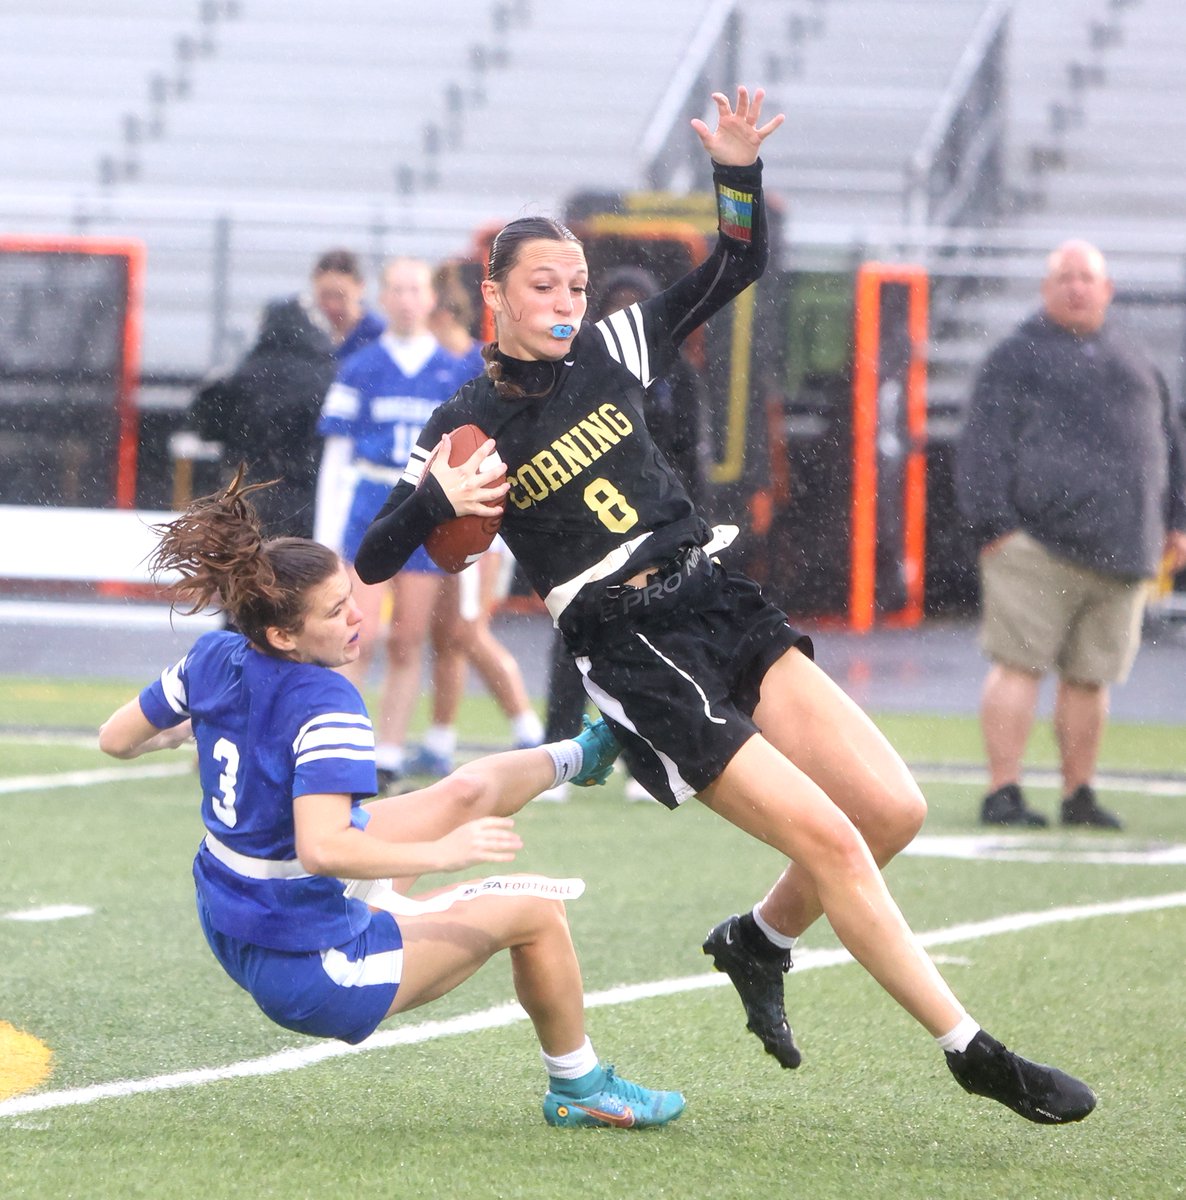 HIGH SCHOOL FLAG FOOTBALL: ROBERTSON SCORES FIVE TOUCHDOWNS AS CORNING TOPS HORSEHEADS (24 PHOTOS). . . @CorningHawks @HhdsSchools @HorseheadsAD stsportsreport.com/index_get.php?… Photo gallery with over 1,400 photos: brianfees.smugmug.com/HORSEHEADS-AT-…